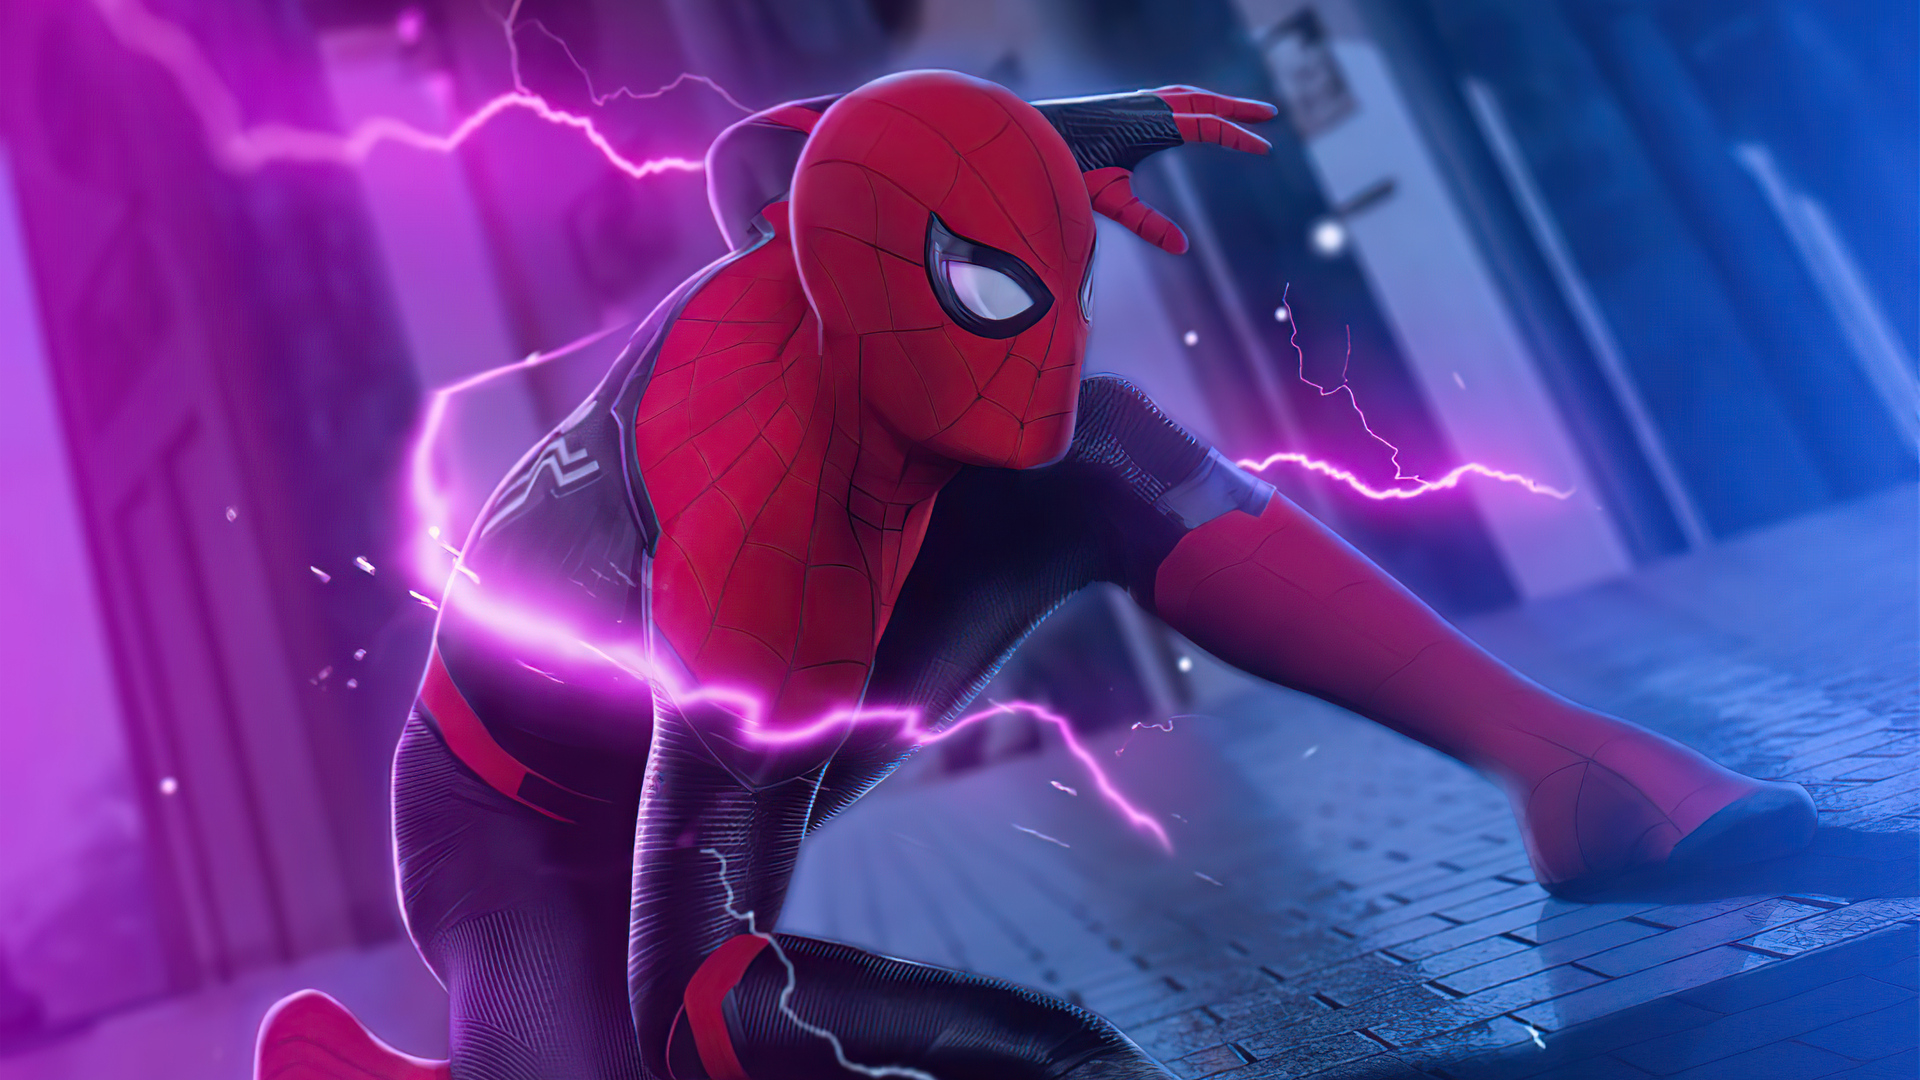 Spider-Man Electric Art Wallpaper, HD Games 4K Wallpapers, Images and